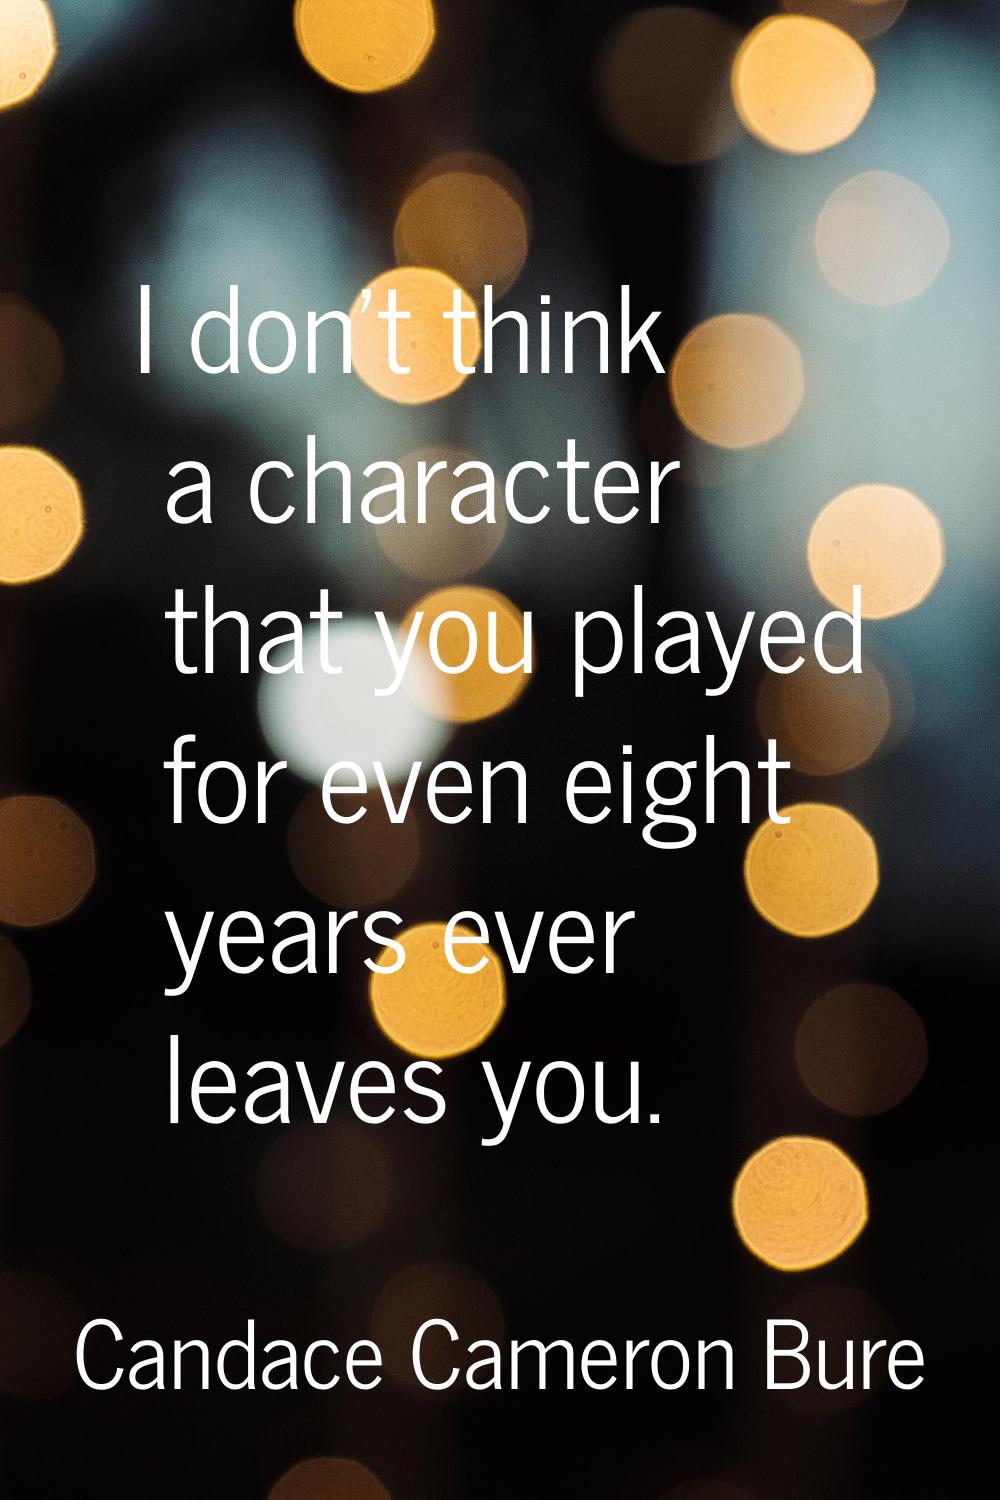 I don't think a character that you played for even eight years ever leaves you.